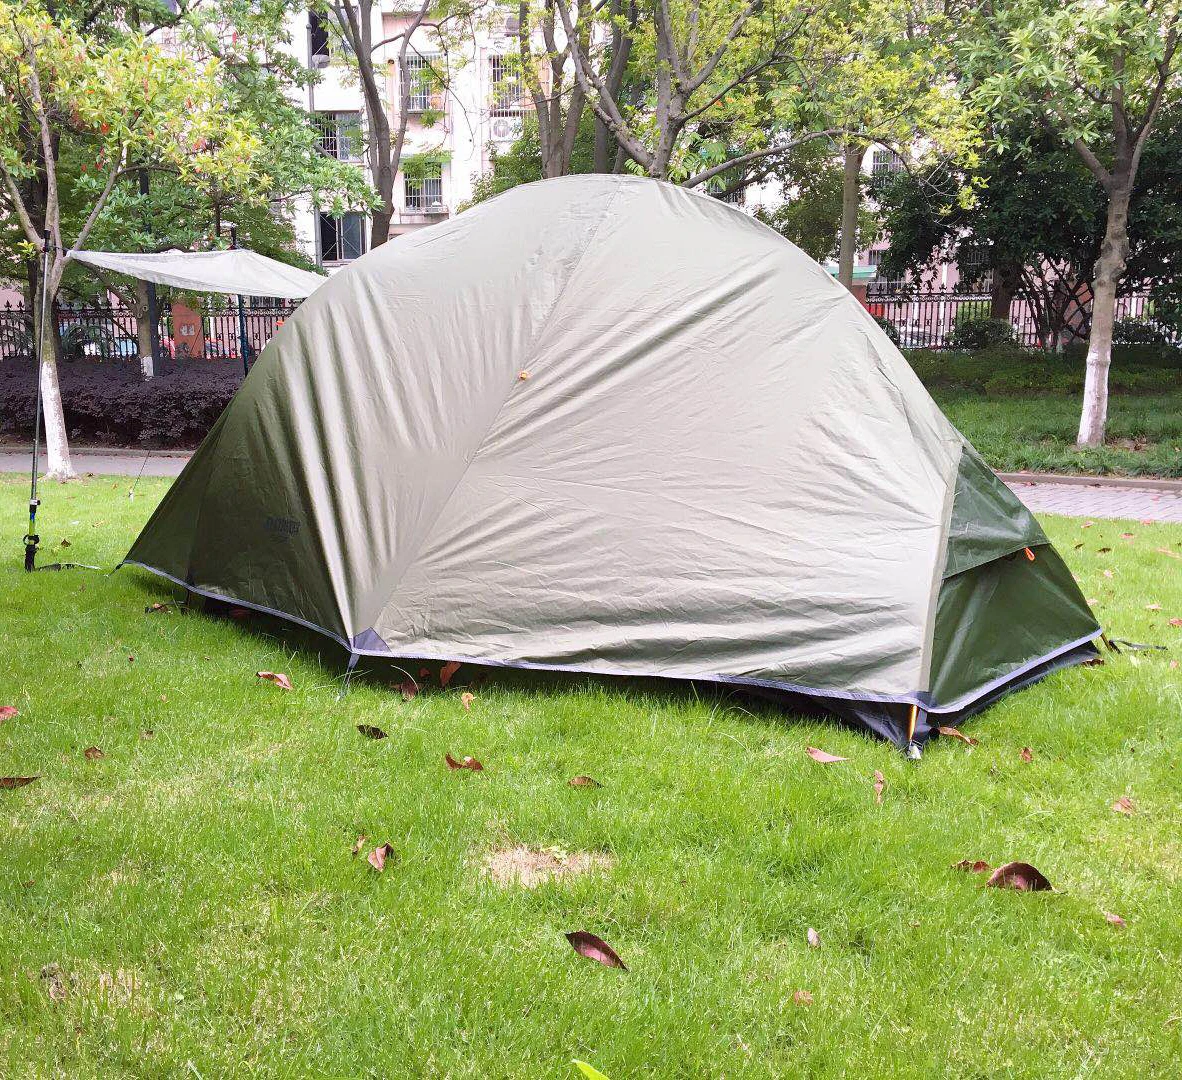 

CZX-298 Army Green 2 Person Nemo Hornet Ultralight Backpacking Tent,Nemo 2 Person tent can customize color and logo as needs, Customized